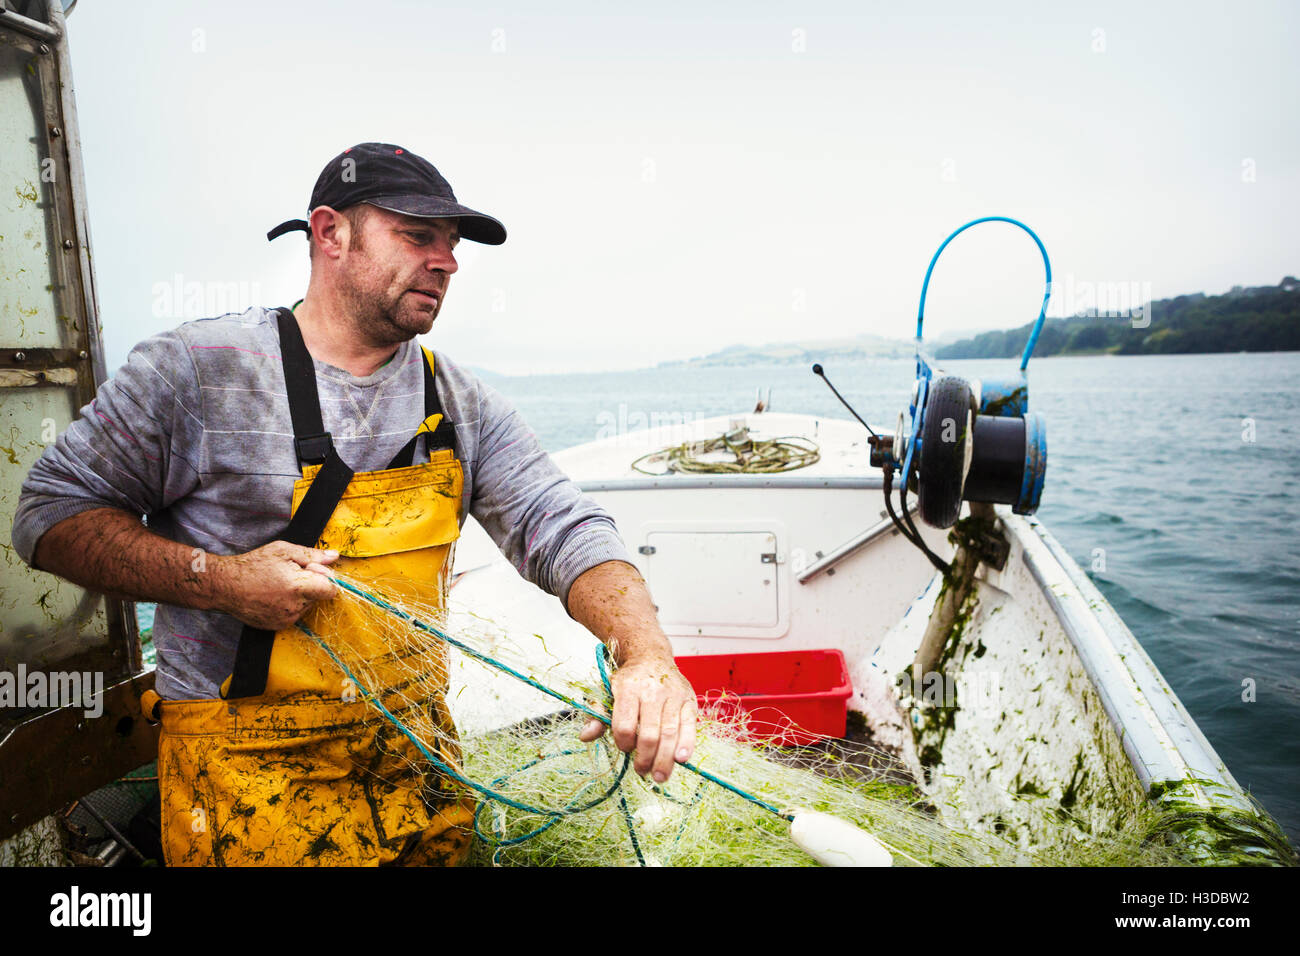 A fisherman on a boat hauling in the fishing net. Stock Photo